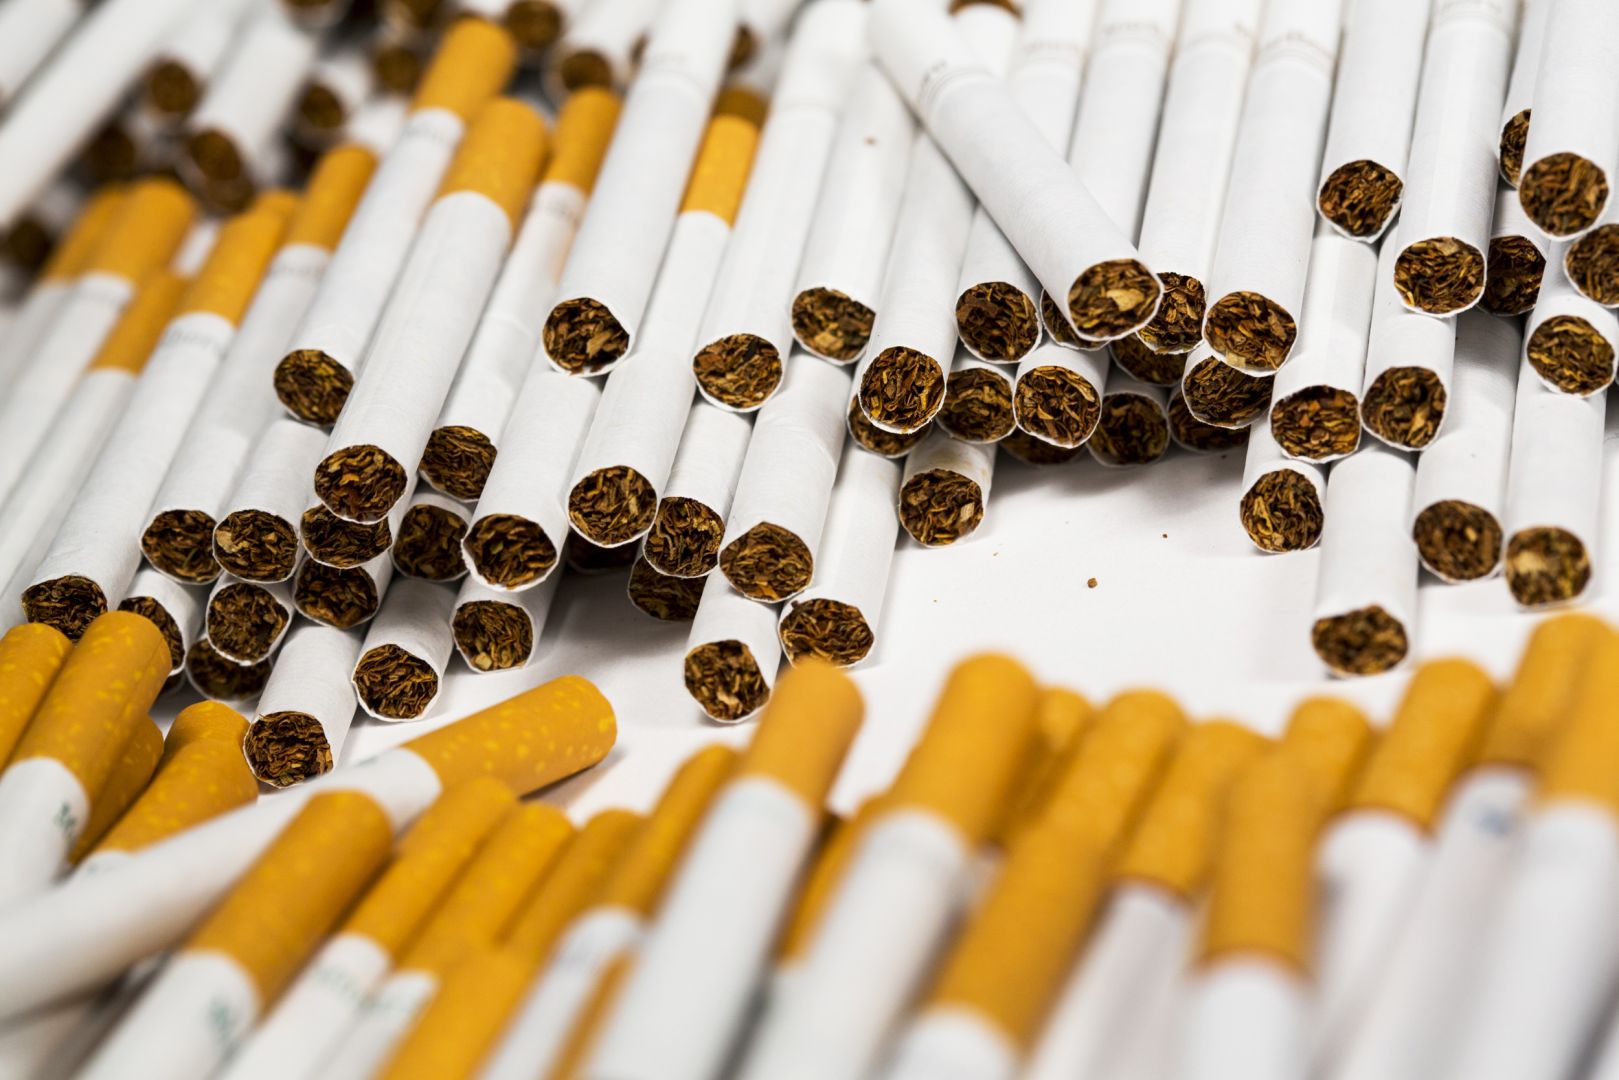 Prices of cigarettes increases